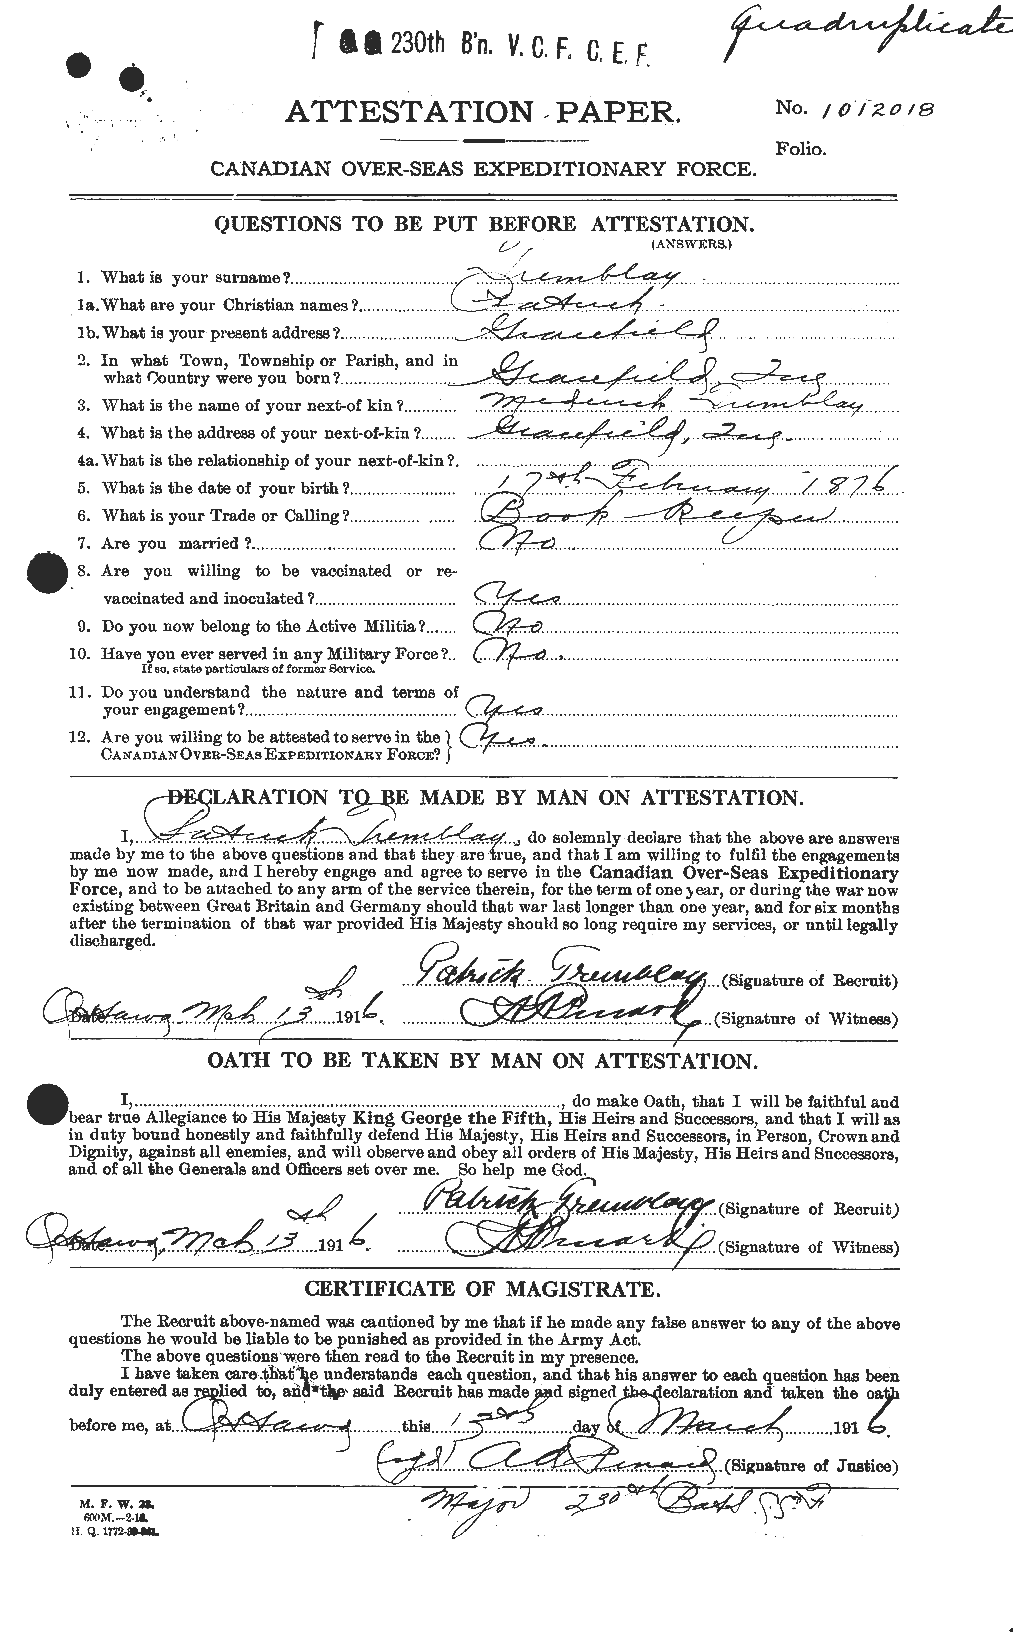 Personnel Records of the First World War - CEF 639227a